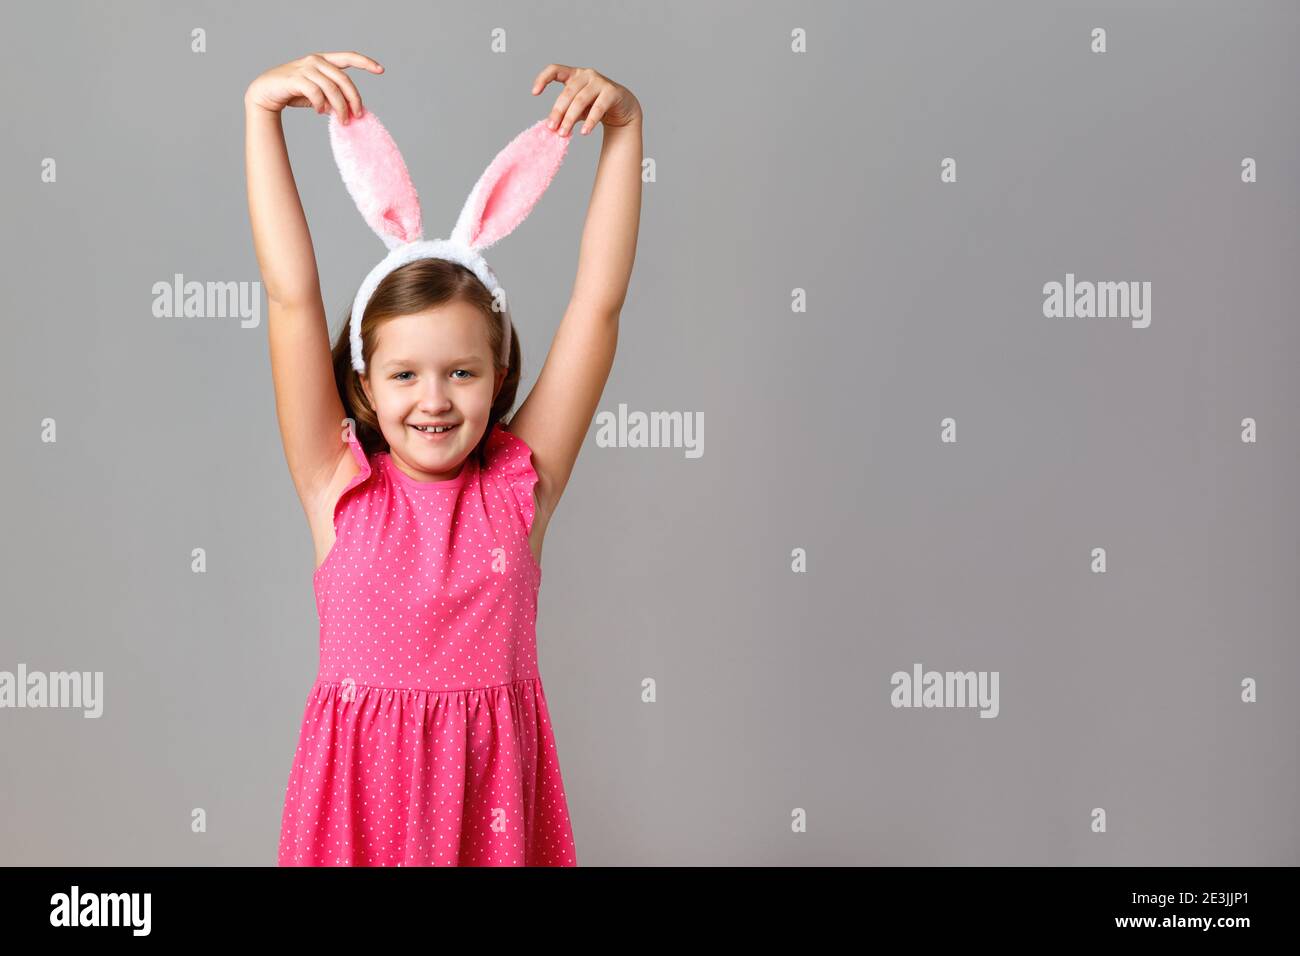 Happy easter. Cheerful little girl in a pink dress with polka dots on a gray background. The child holds his hands behind the rabbit ears. Stock Photo